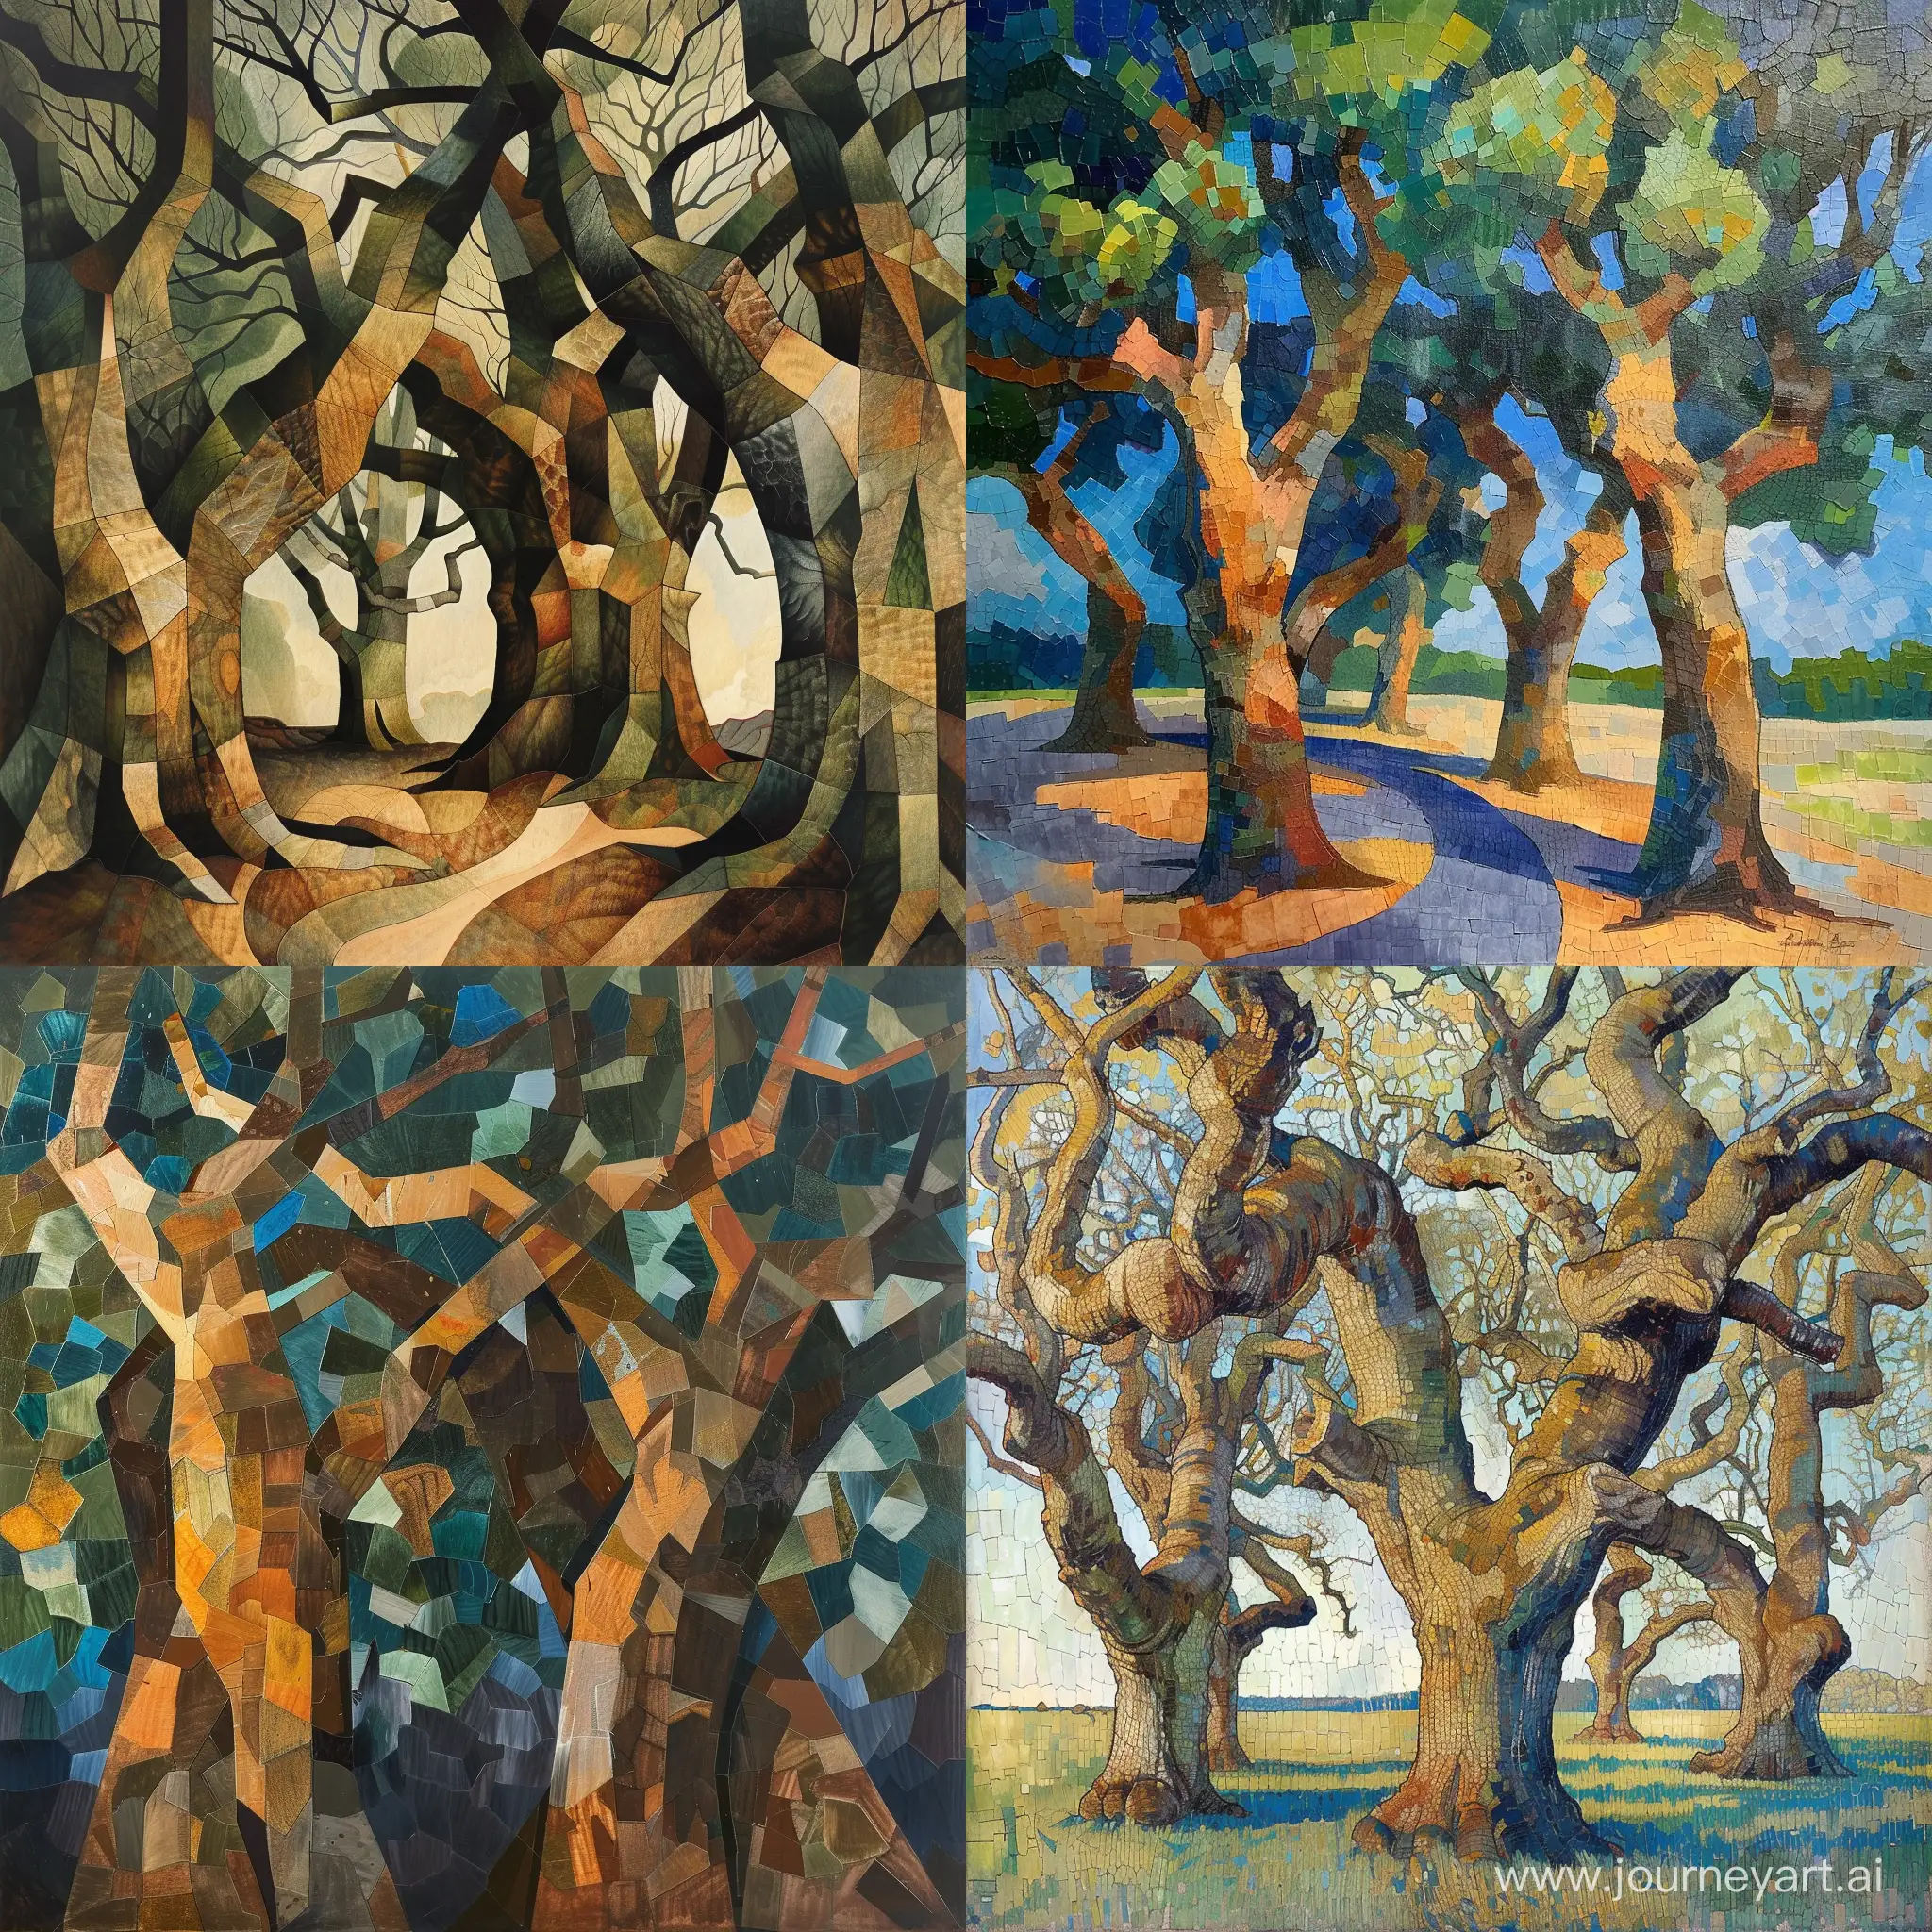 Cubist-Interpretation-of-Old-Oaks-Abstract-Artistic-Depiction-of-Trees